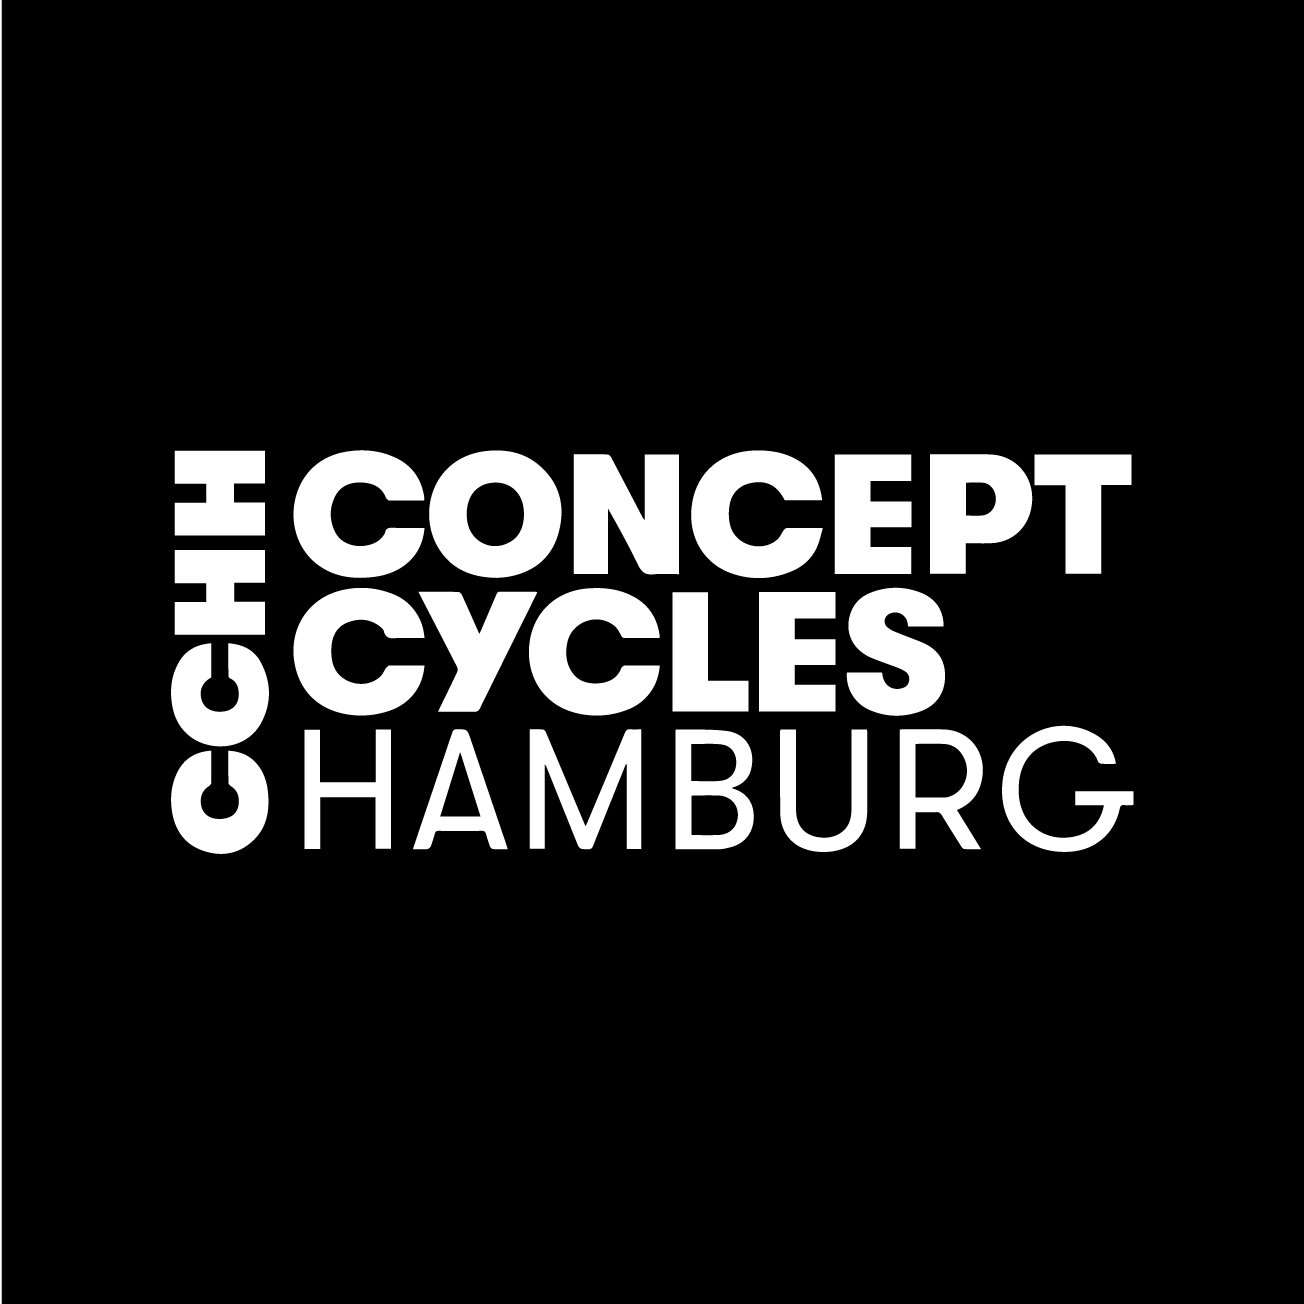 Club Image for CONCEPT CYCLES HAMBURG